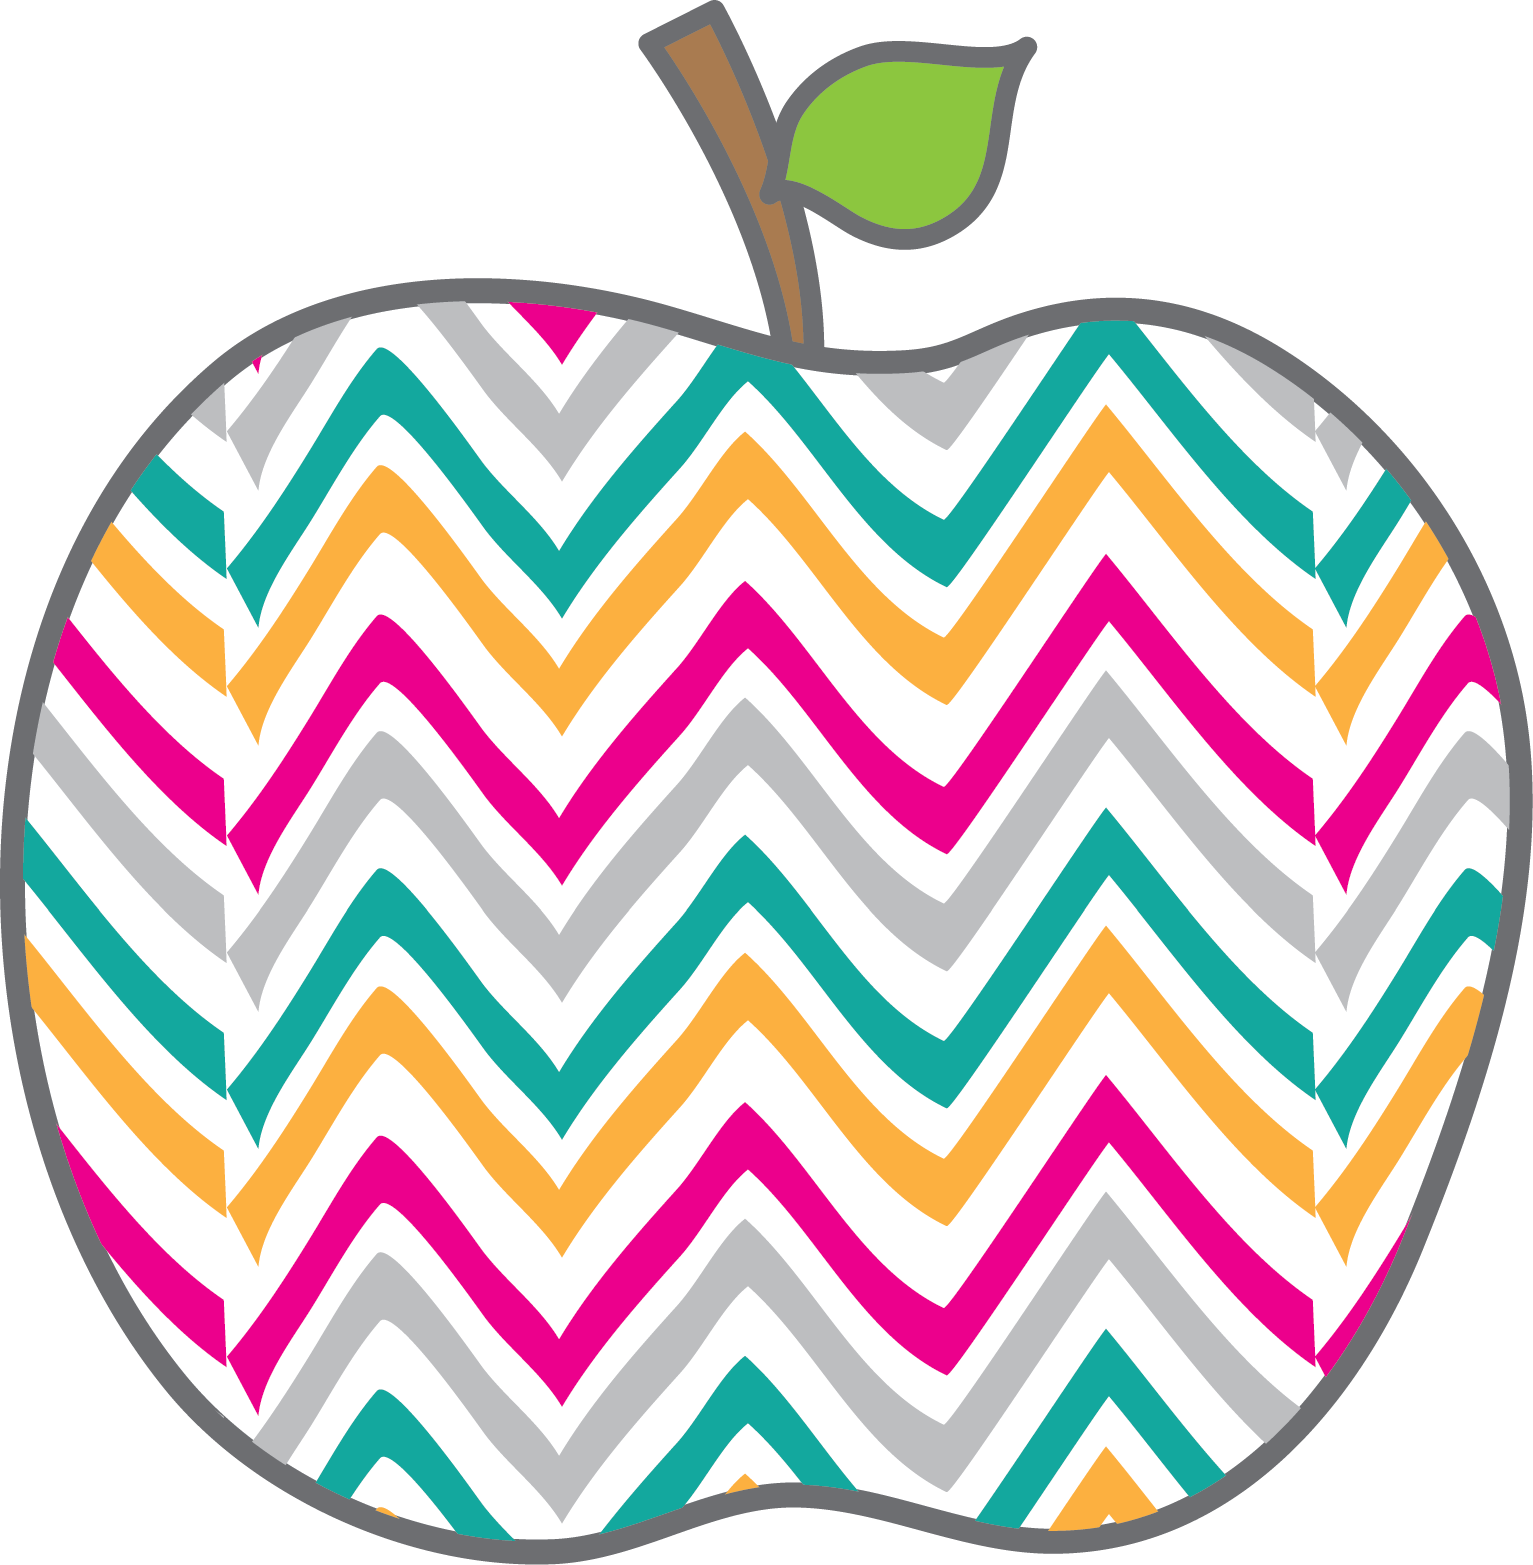 September happiness is watermelon. Clipart apples teal